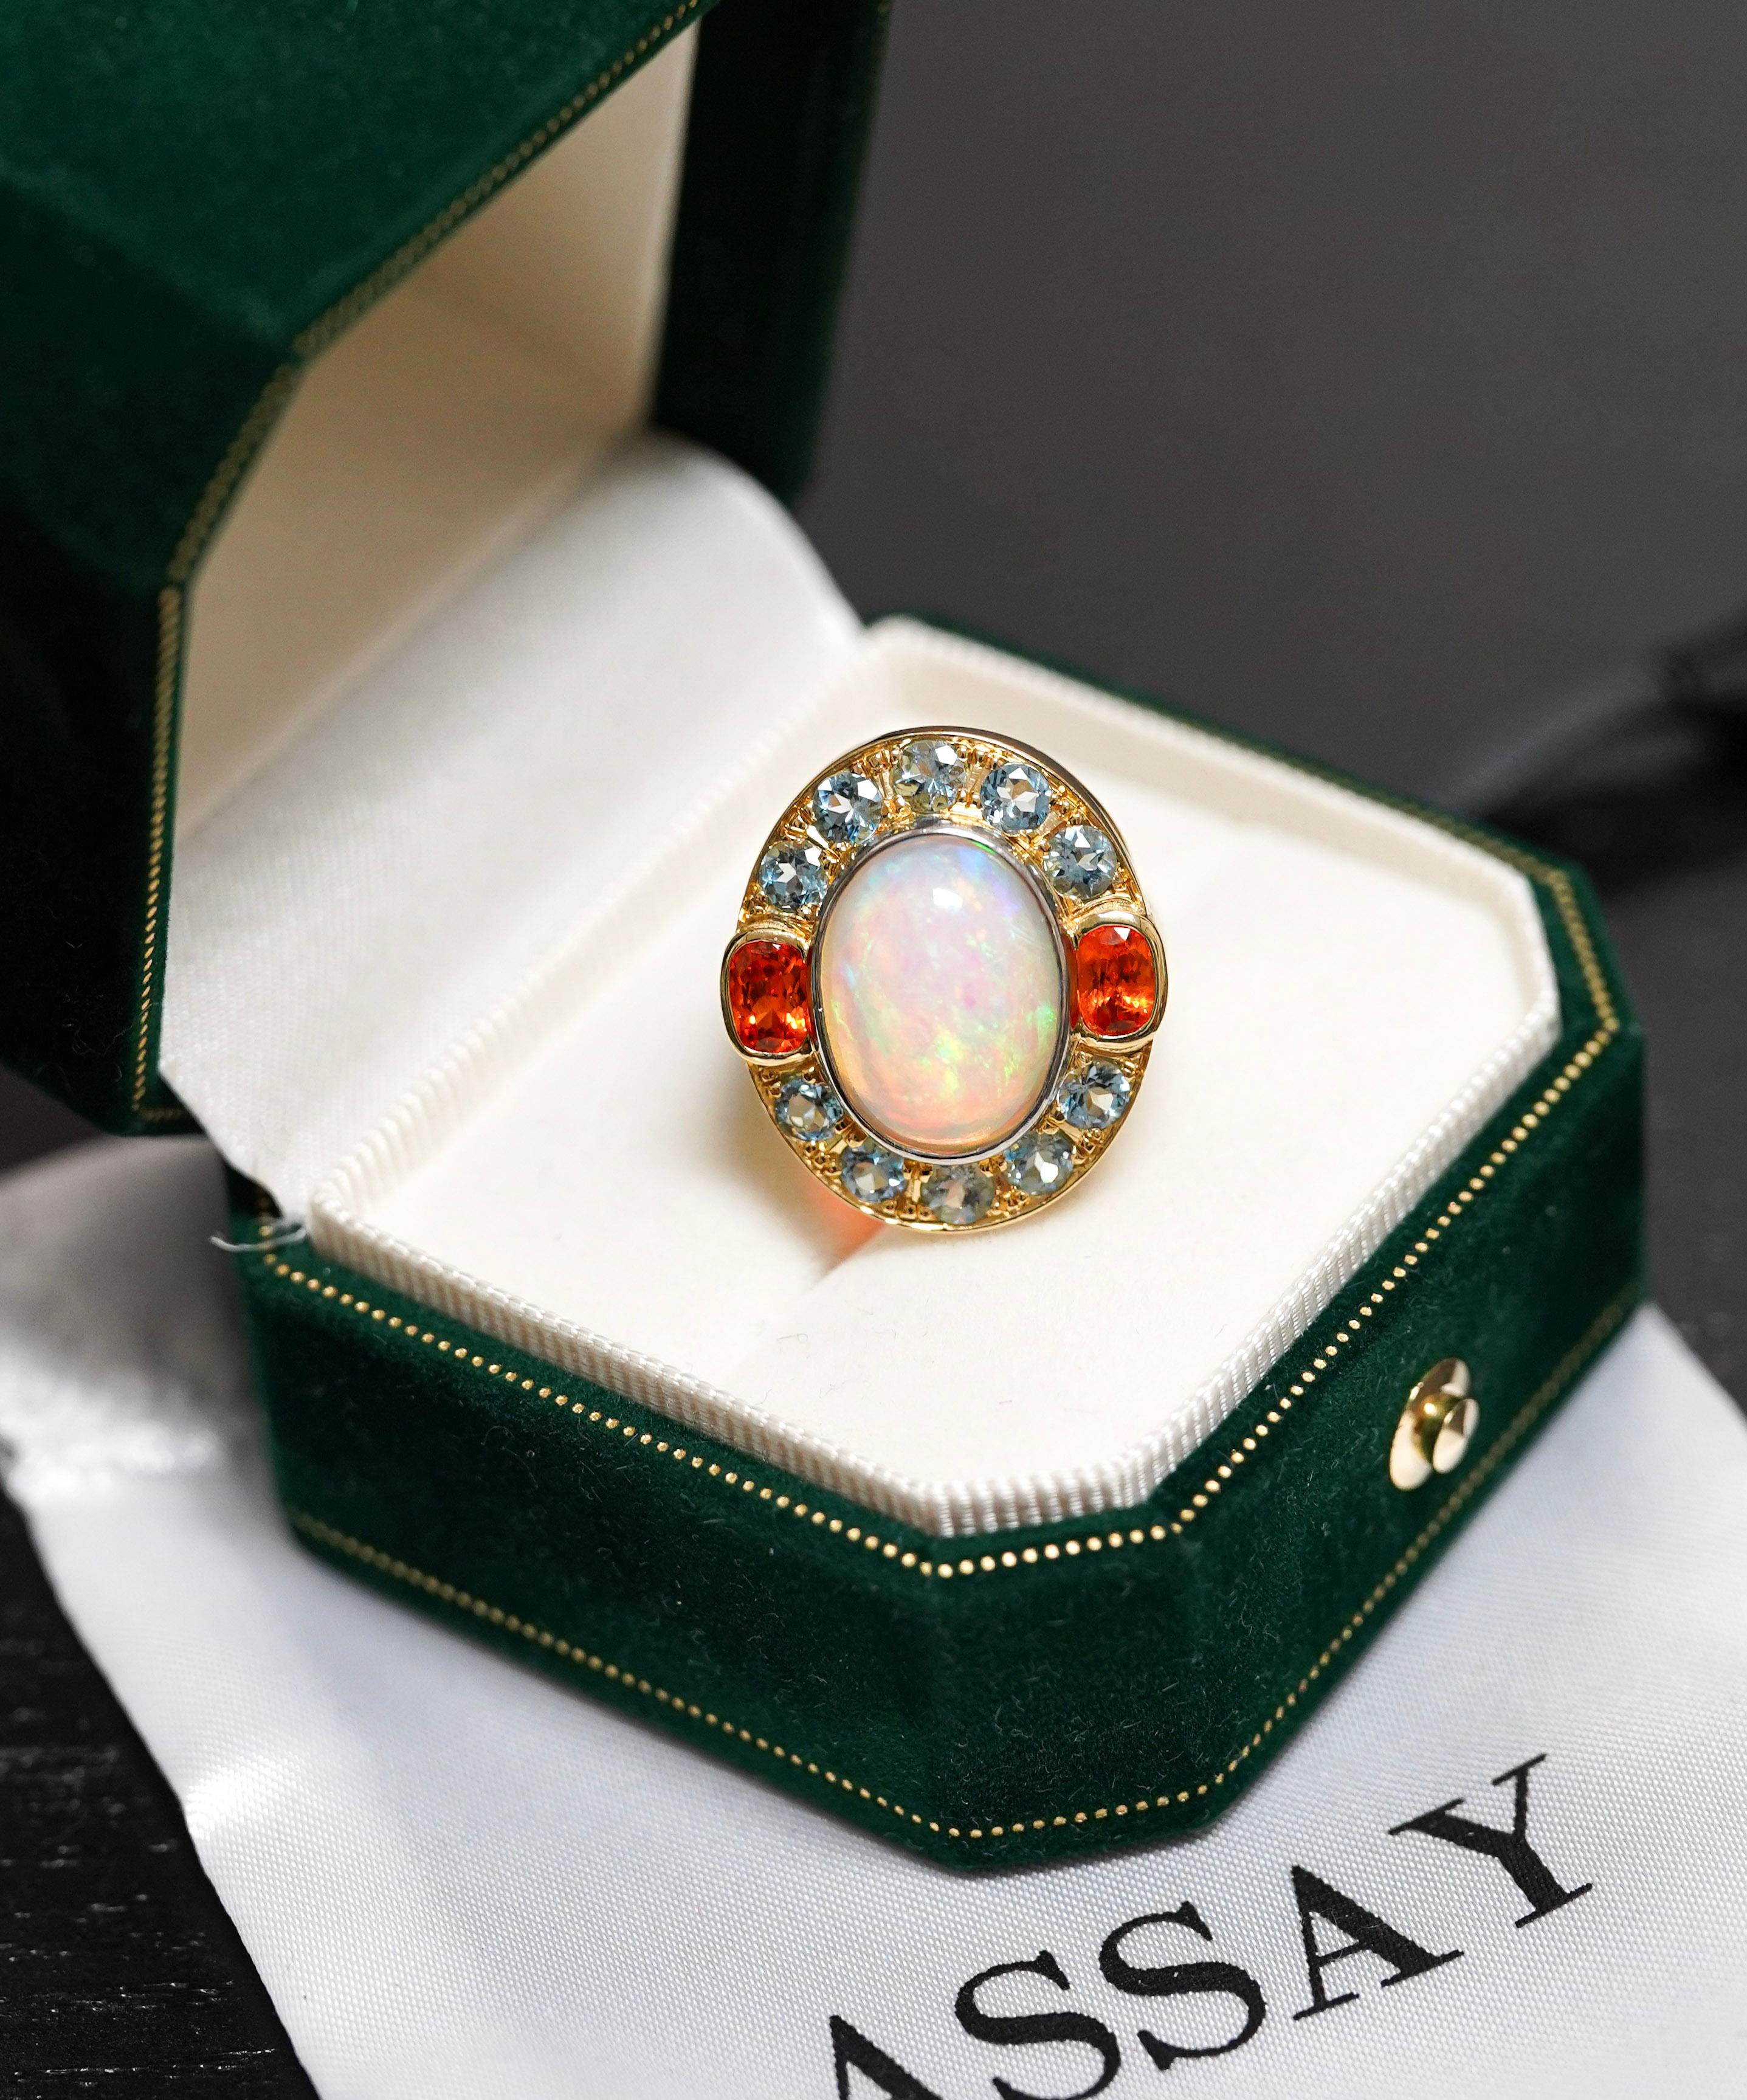 Cabochon GIA Certified 8 Carat White Opal With Orange Garnet & Aquamarine Halo Ring For Sale